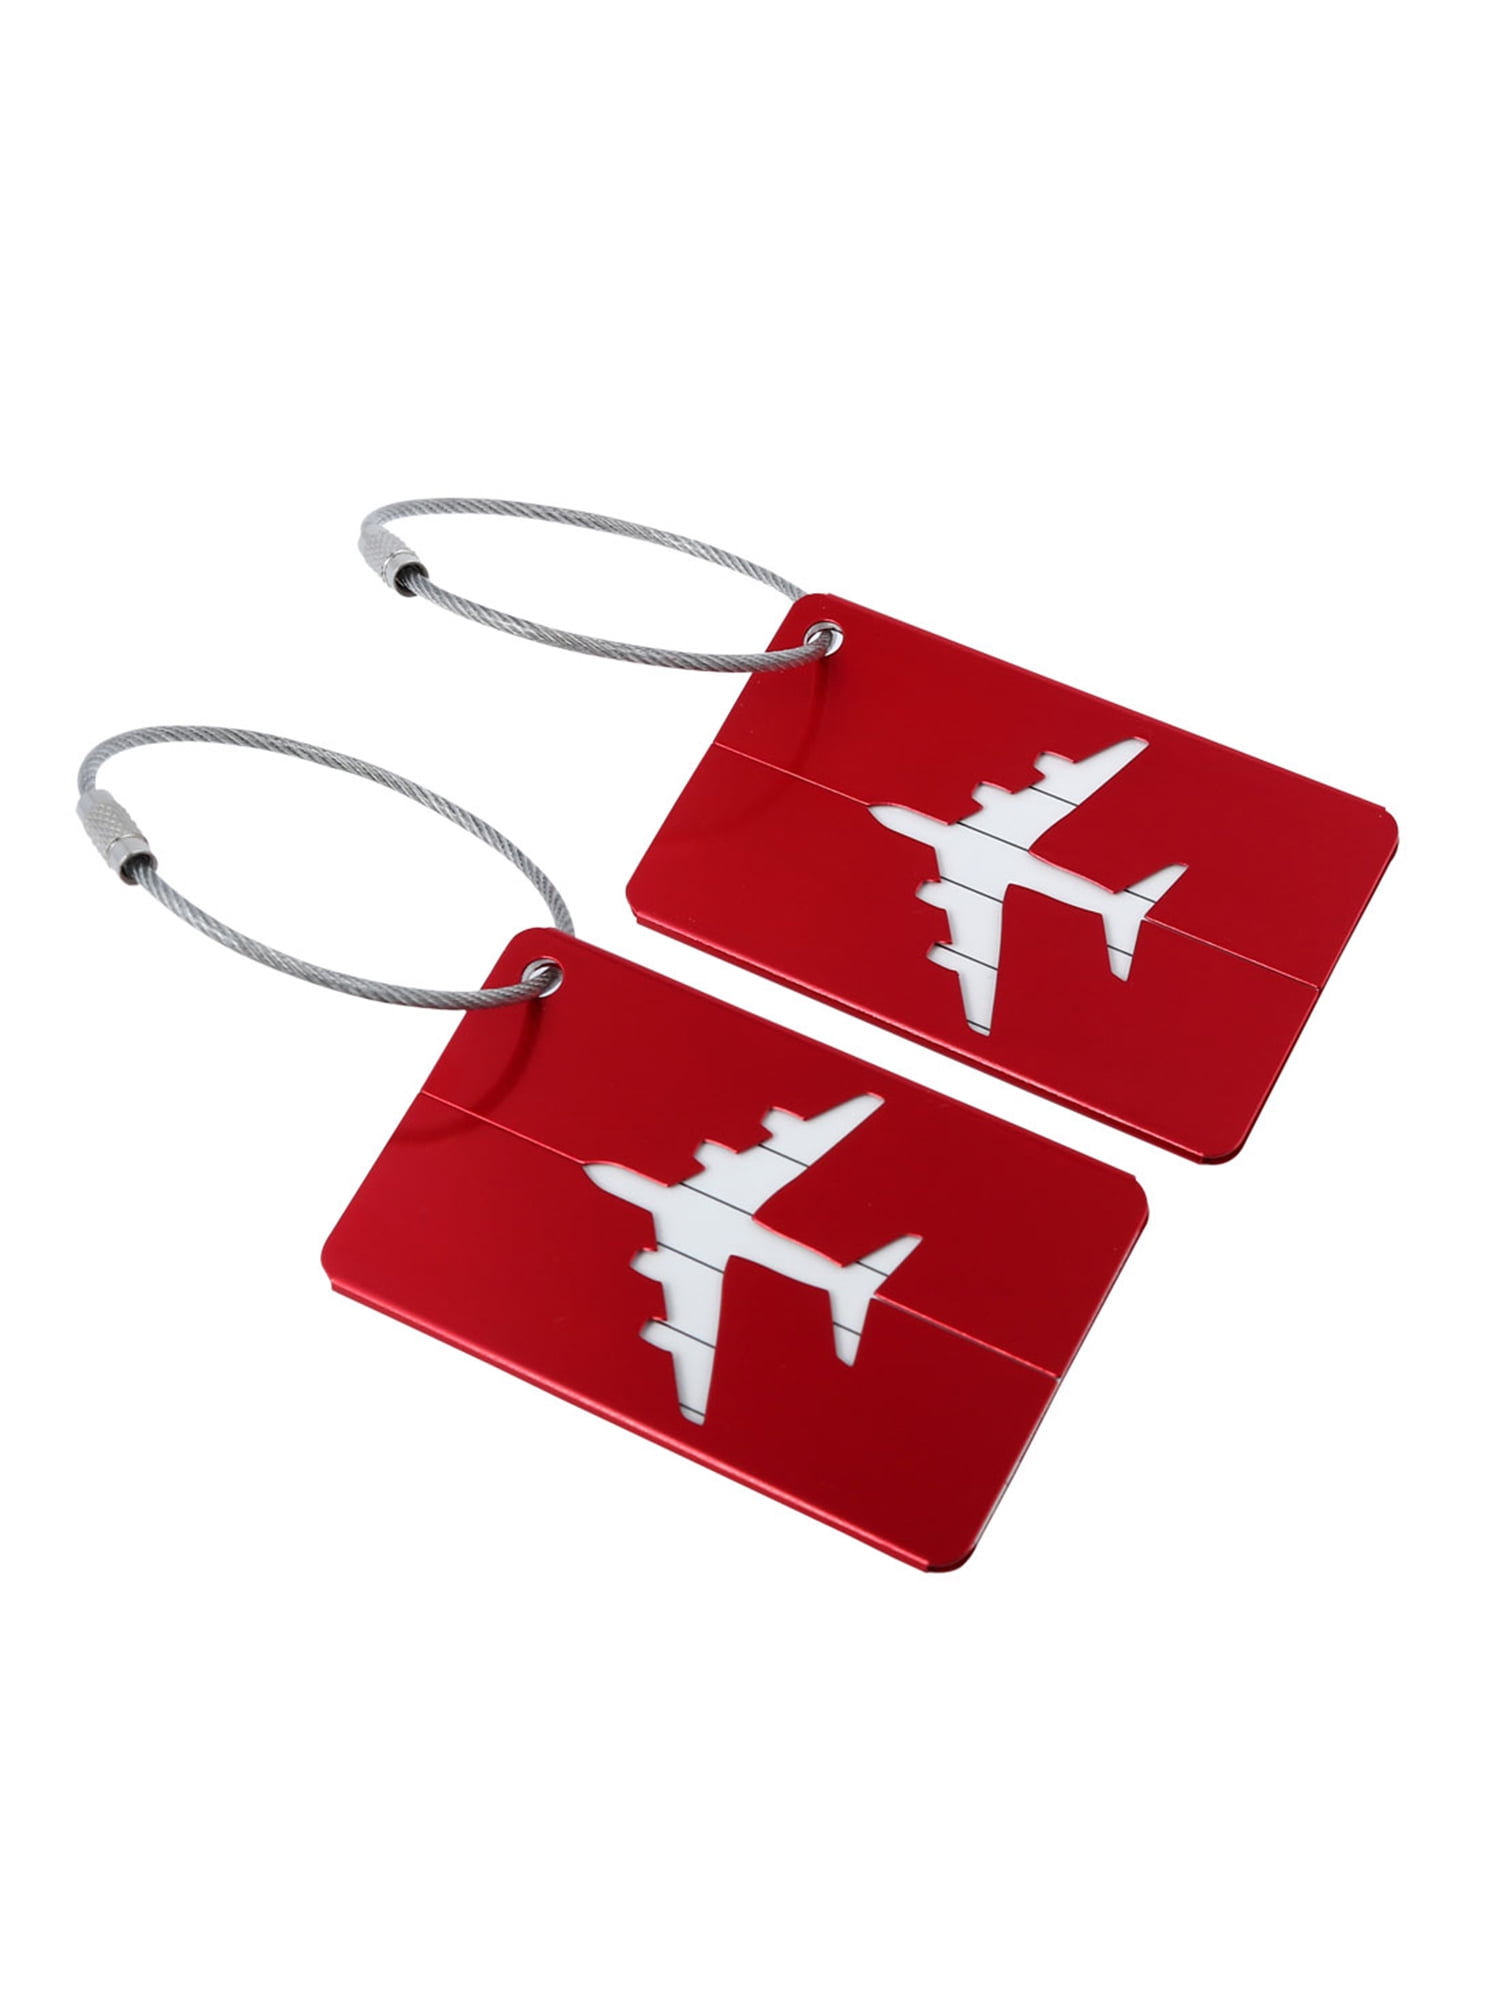 Anchors Handbag Tag For Travel Bag Suitcase Accessories 2 Pack Luggage Tags 